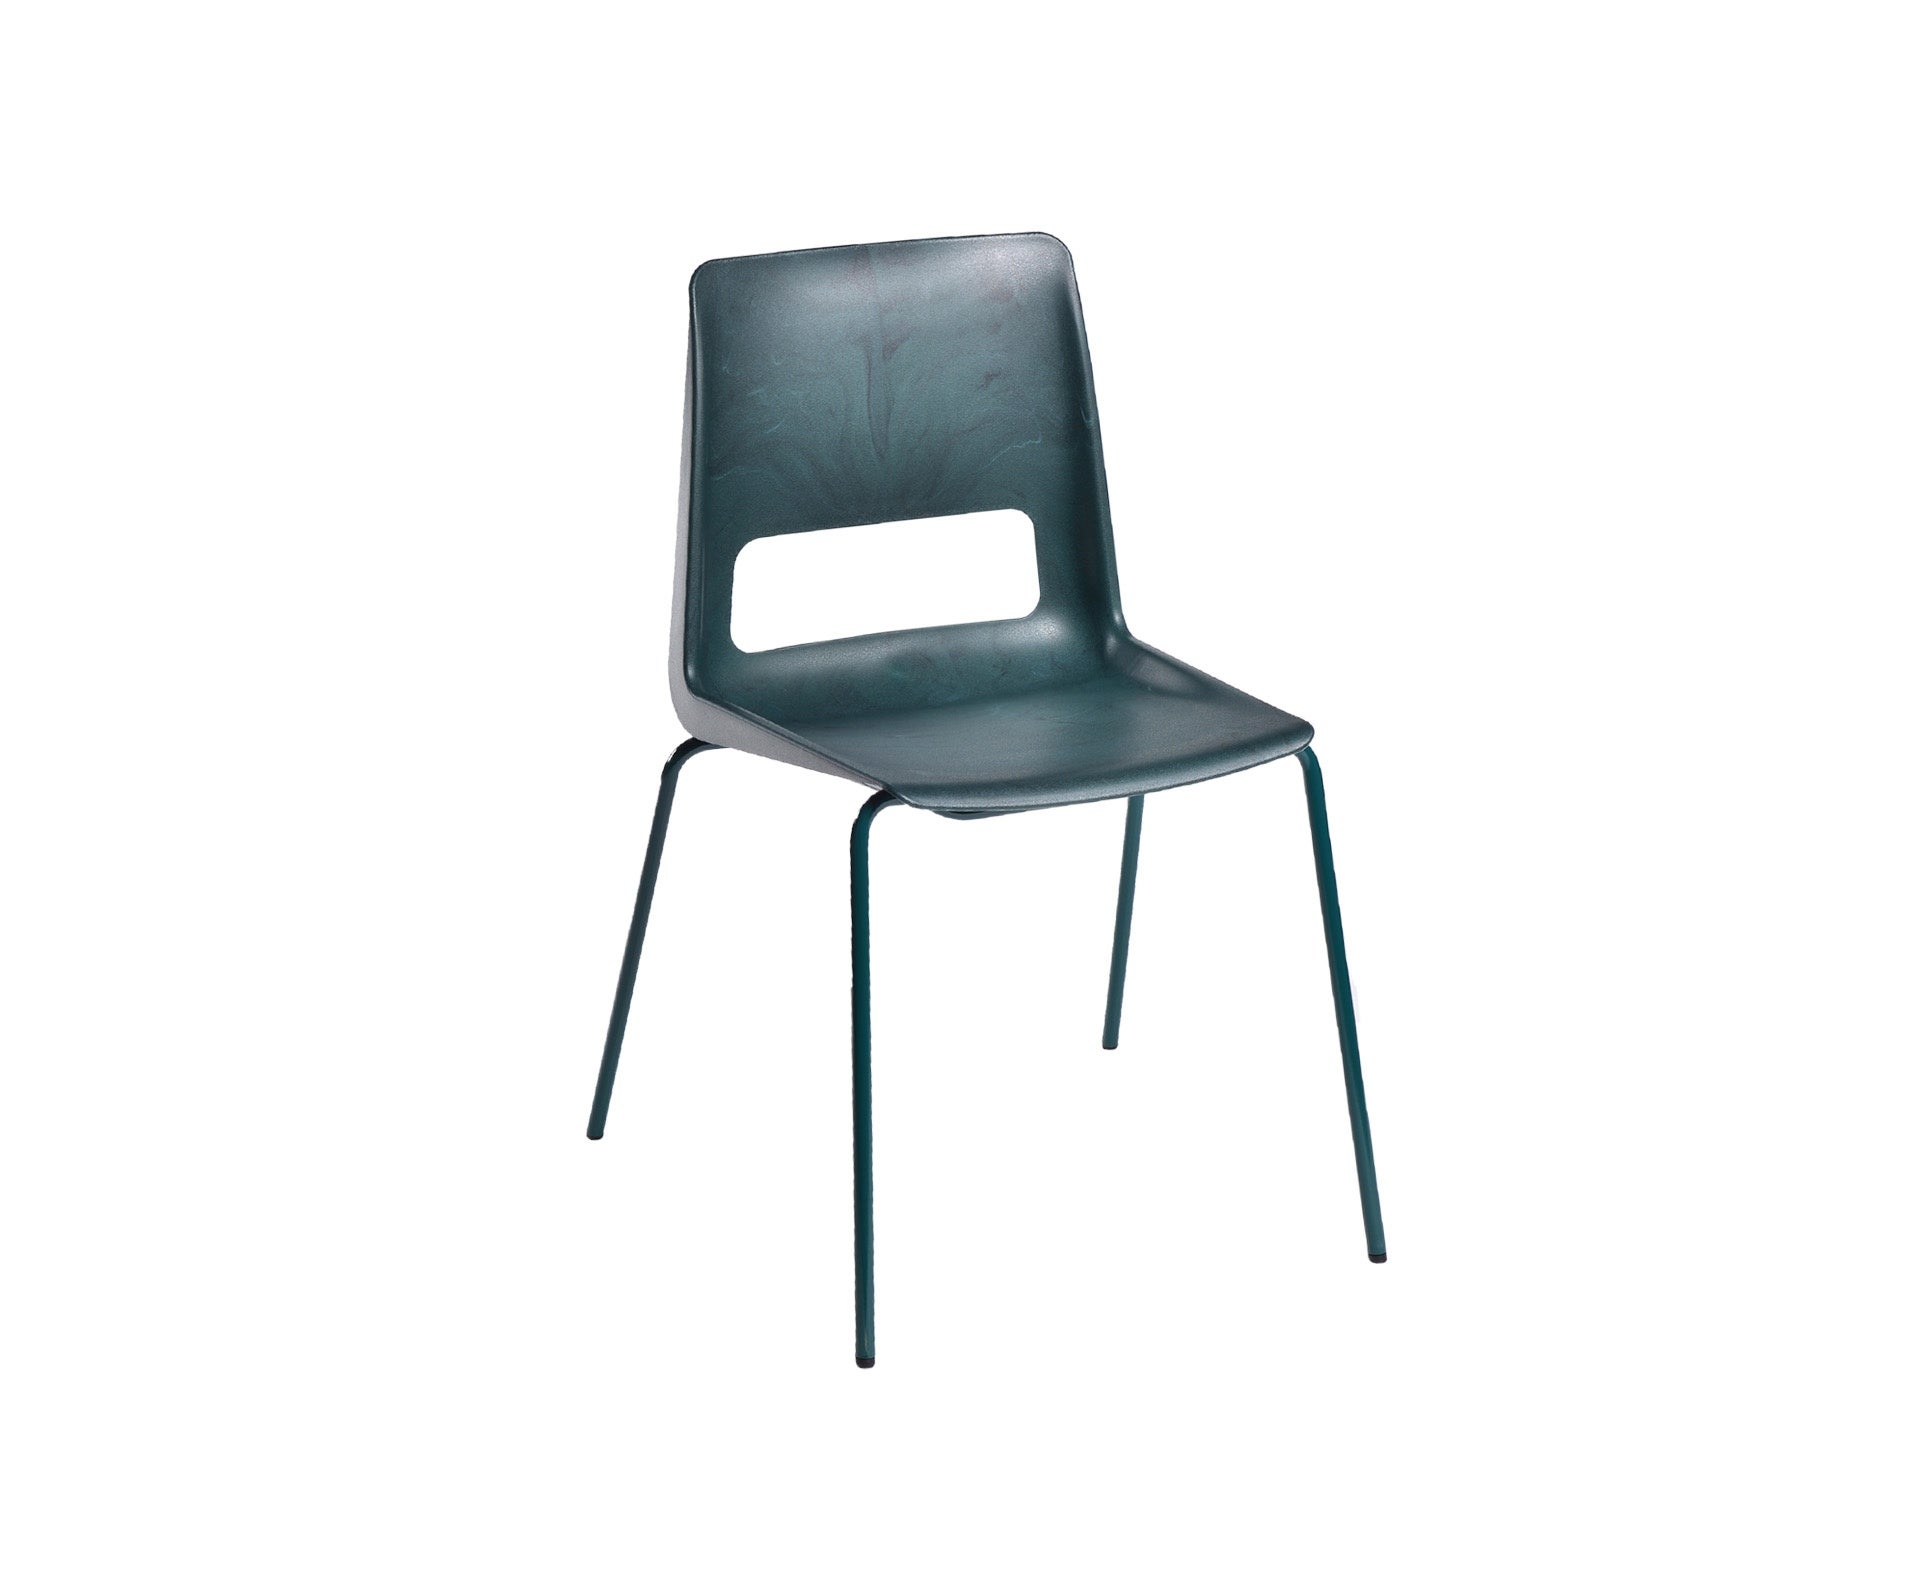 Green stacking chair